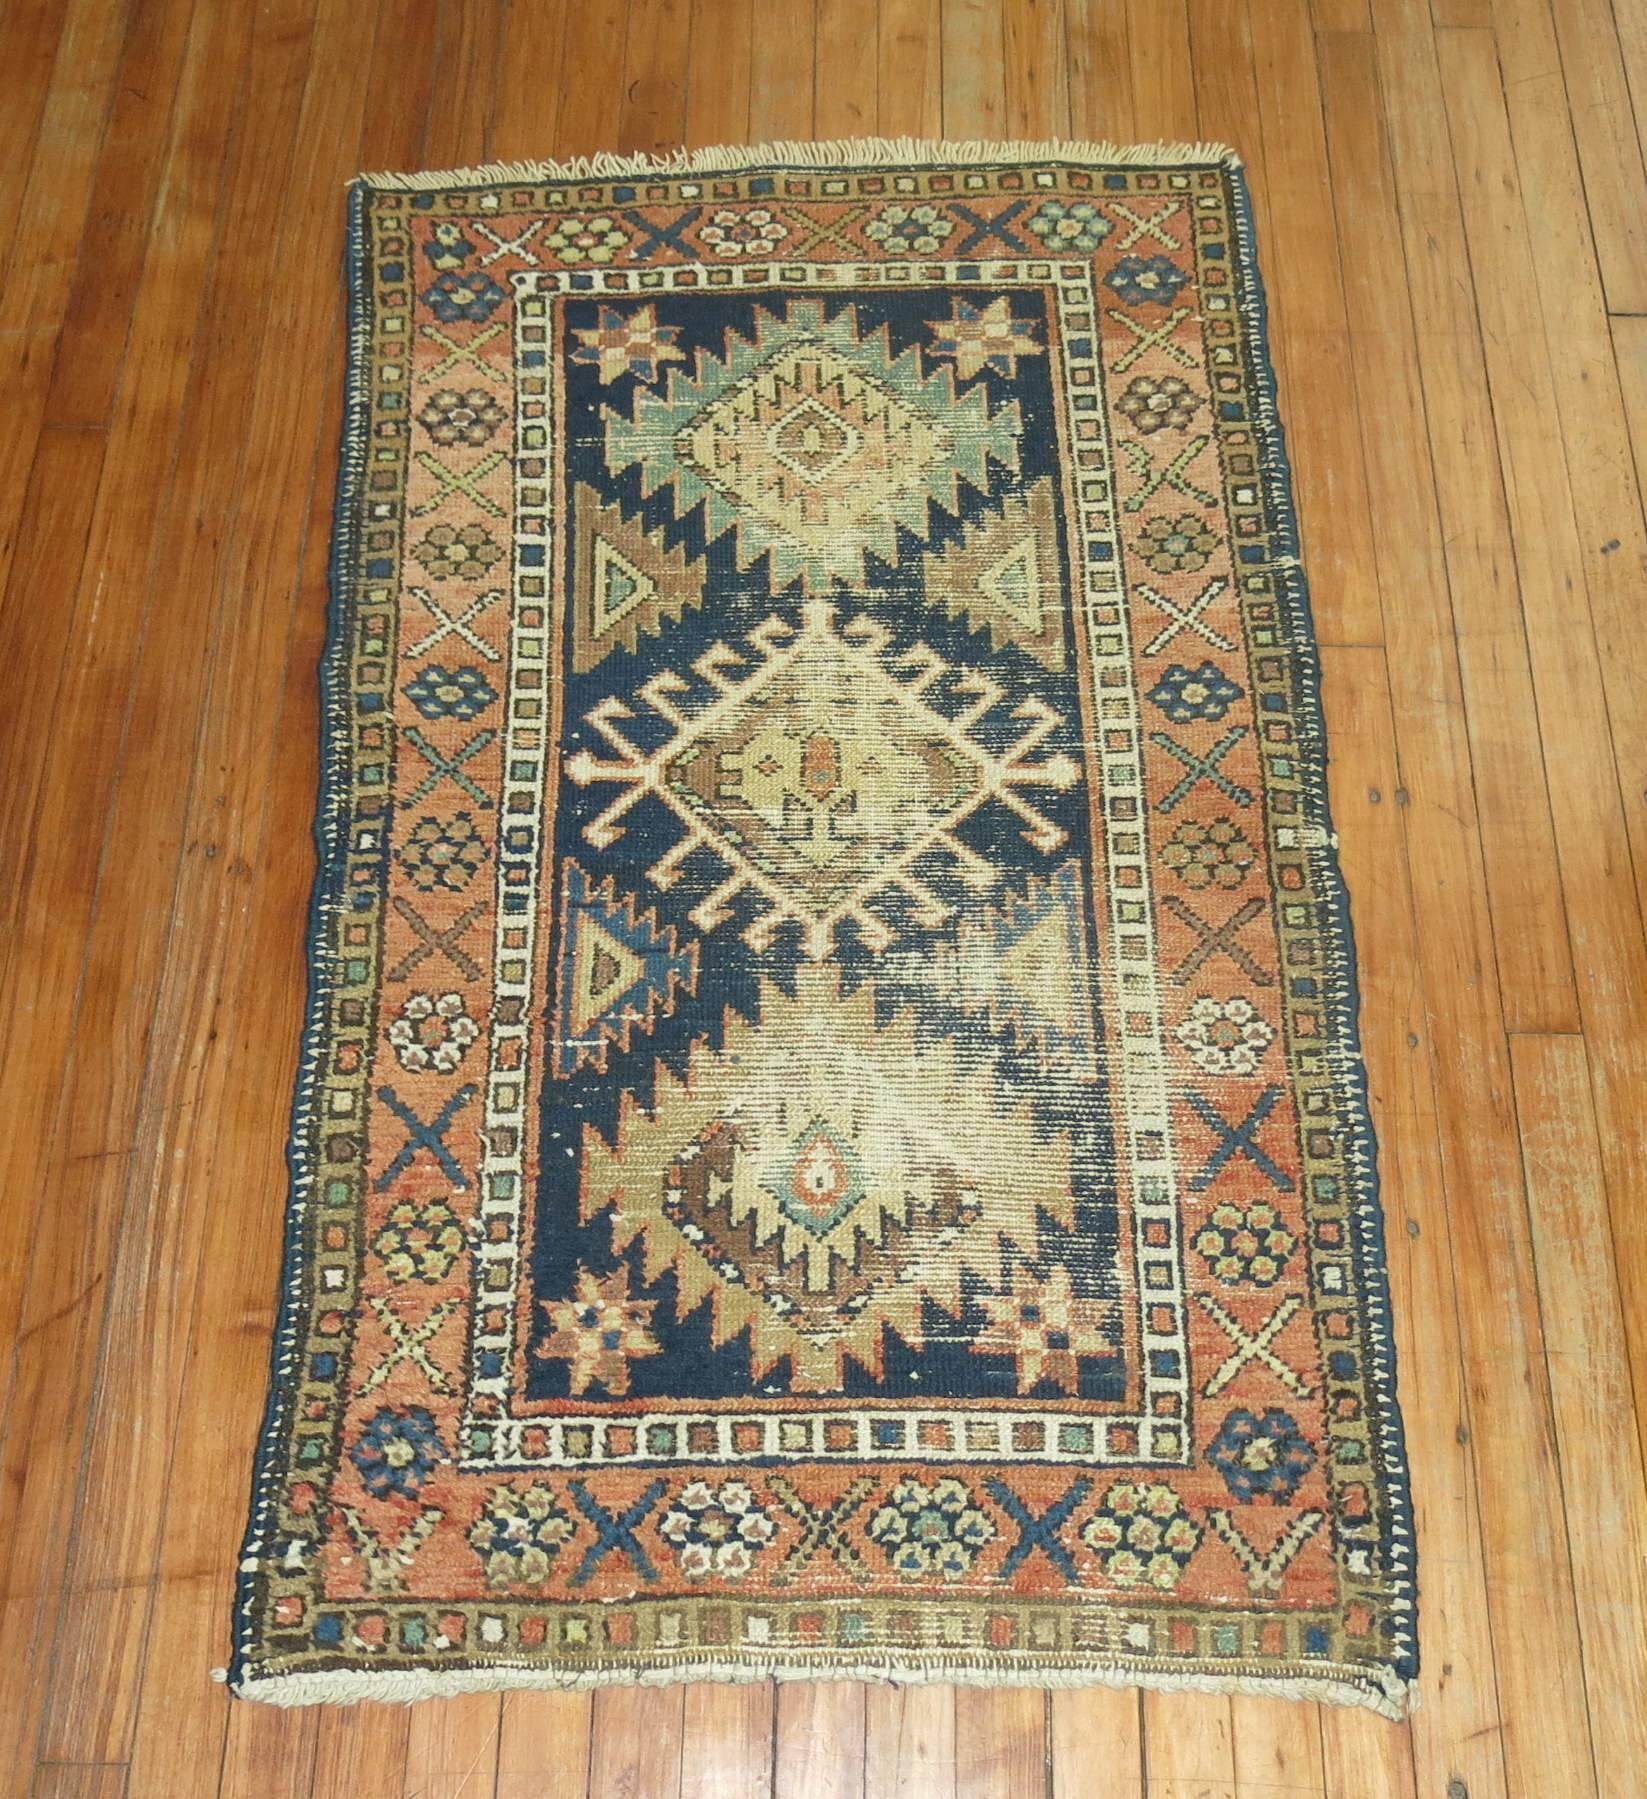 Early 20th century authentic Persian Heriz Rug.

We love the  natural wear on this rug because it shows a real taste of the life that it's already lived,  Also shows it has a had a history and character which  truly makes it one of a kind